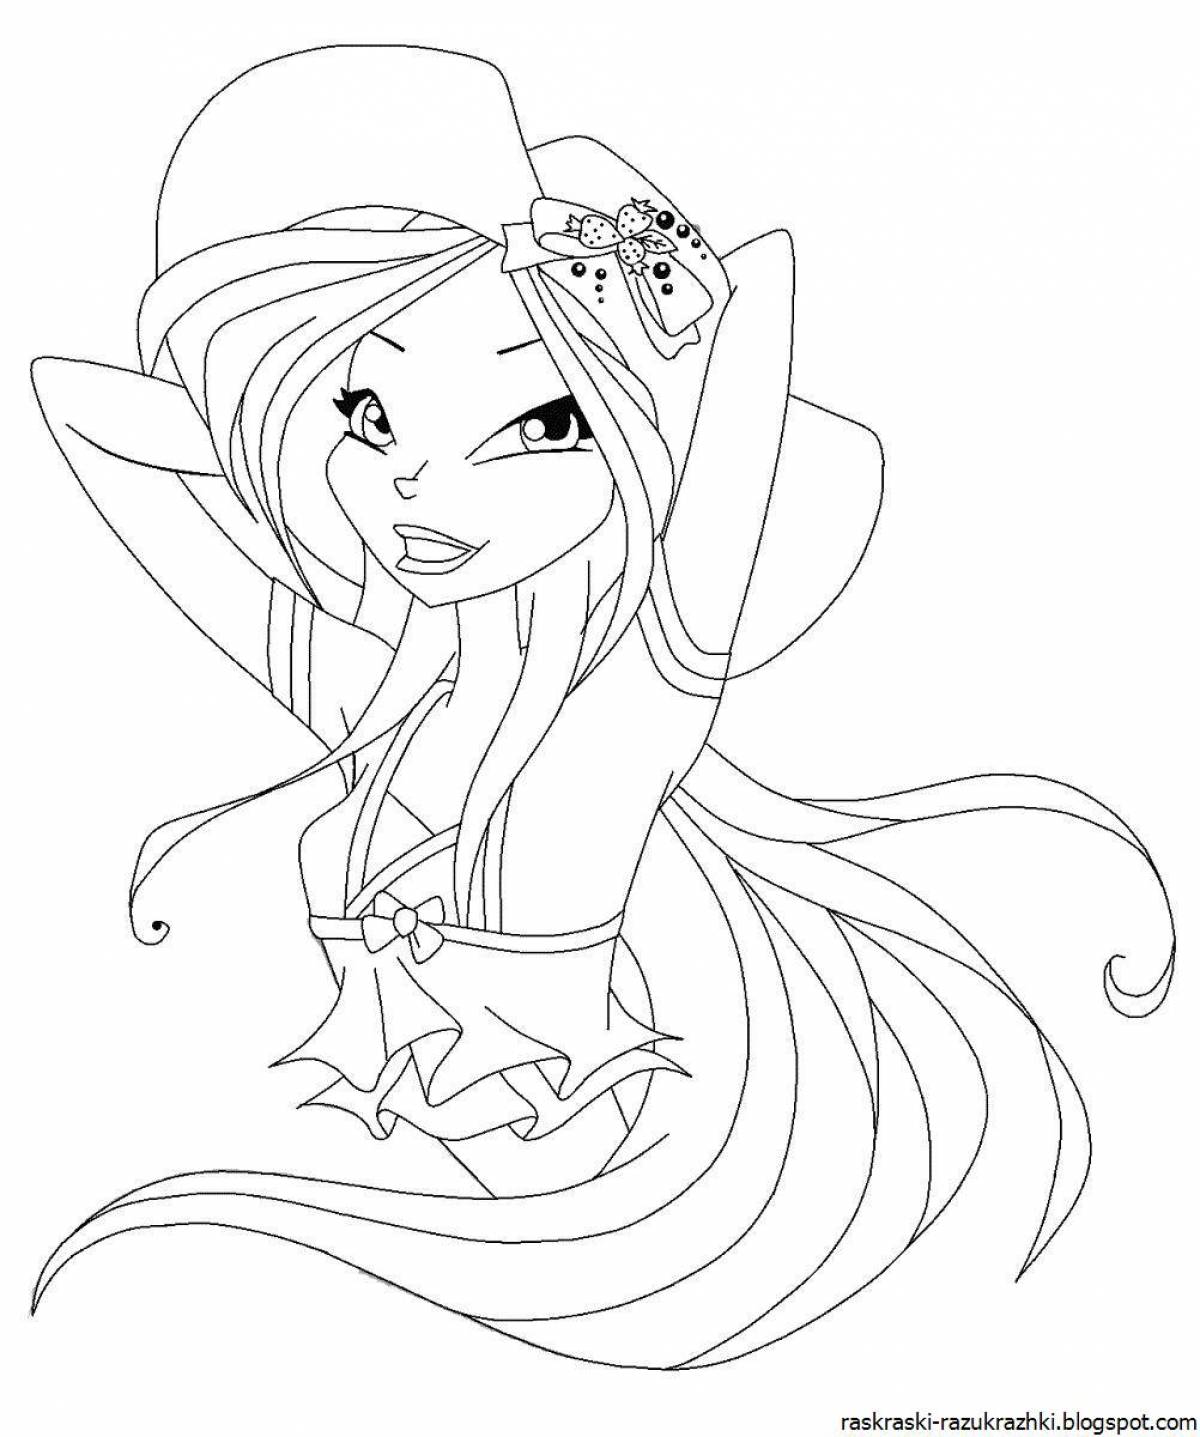 Coloring book sparkling lalaphan